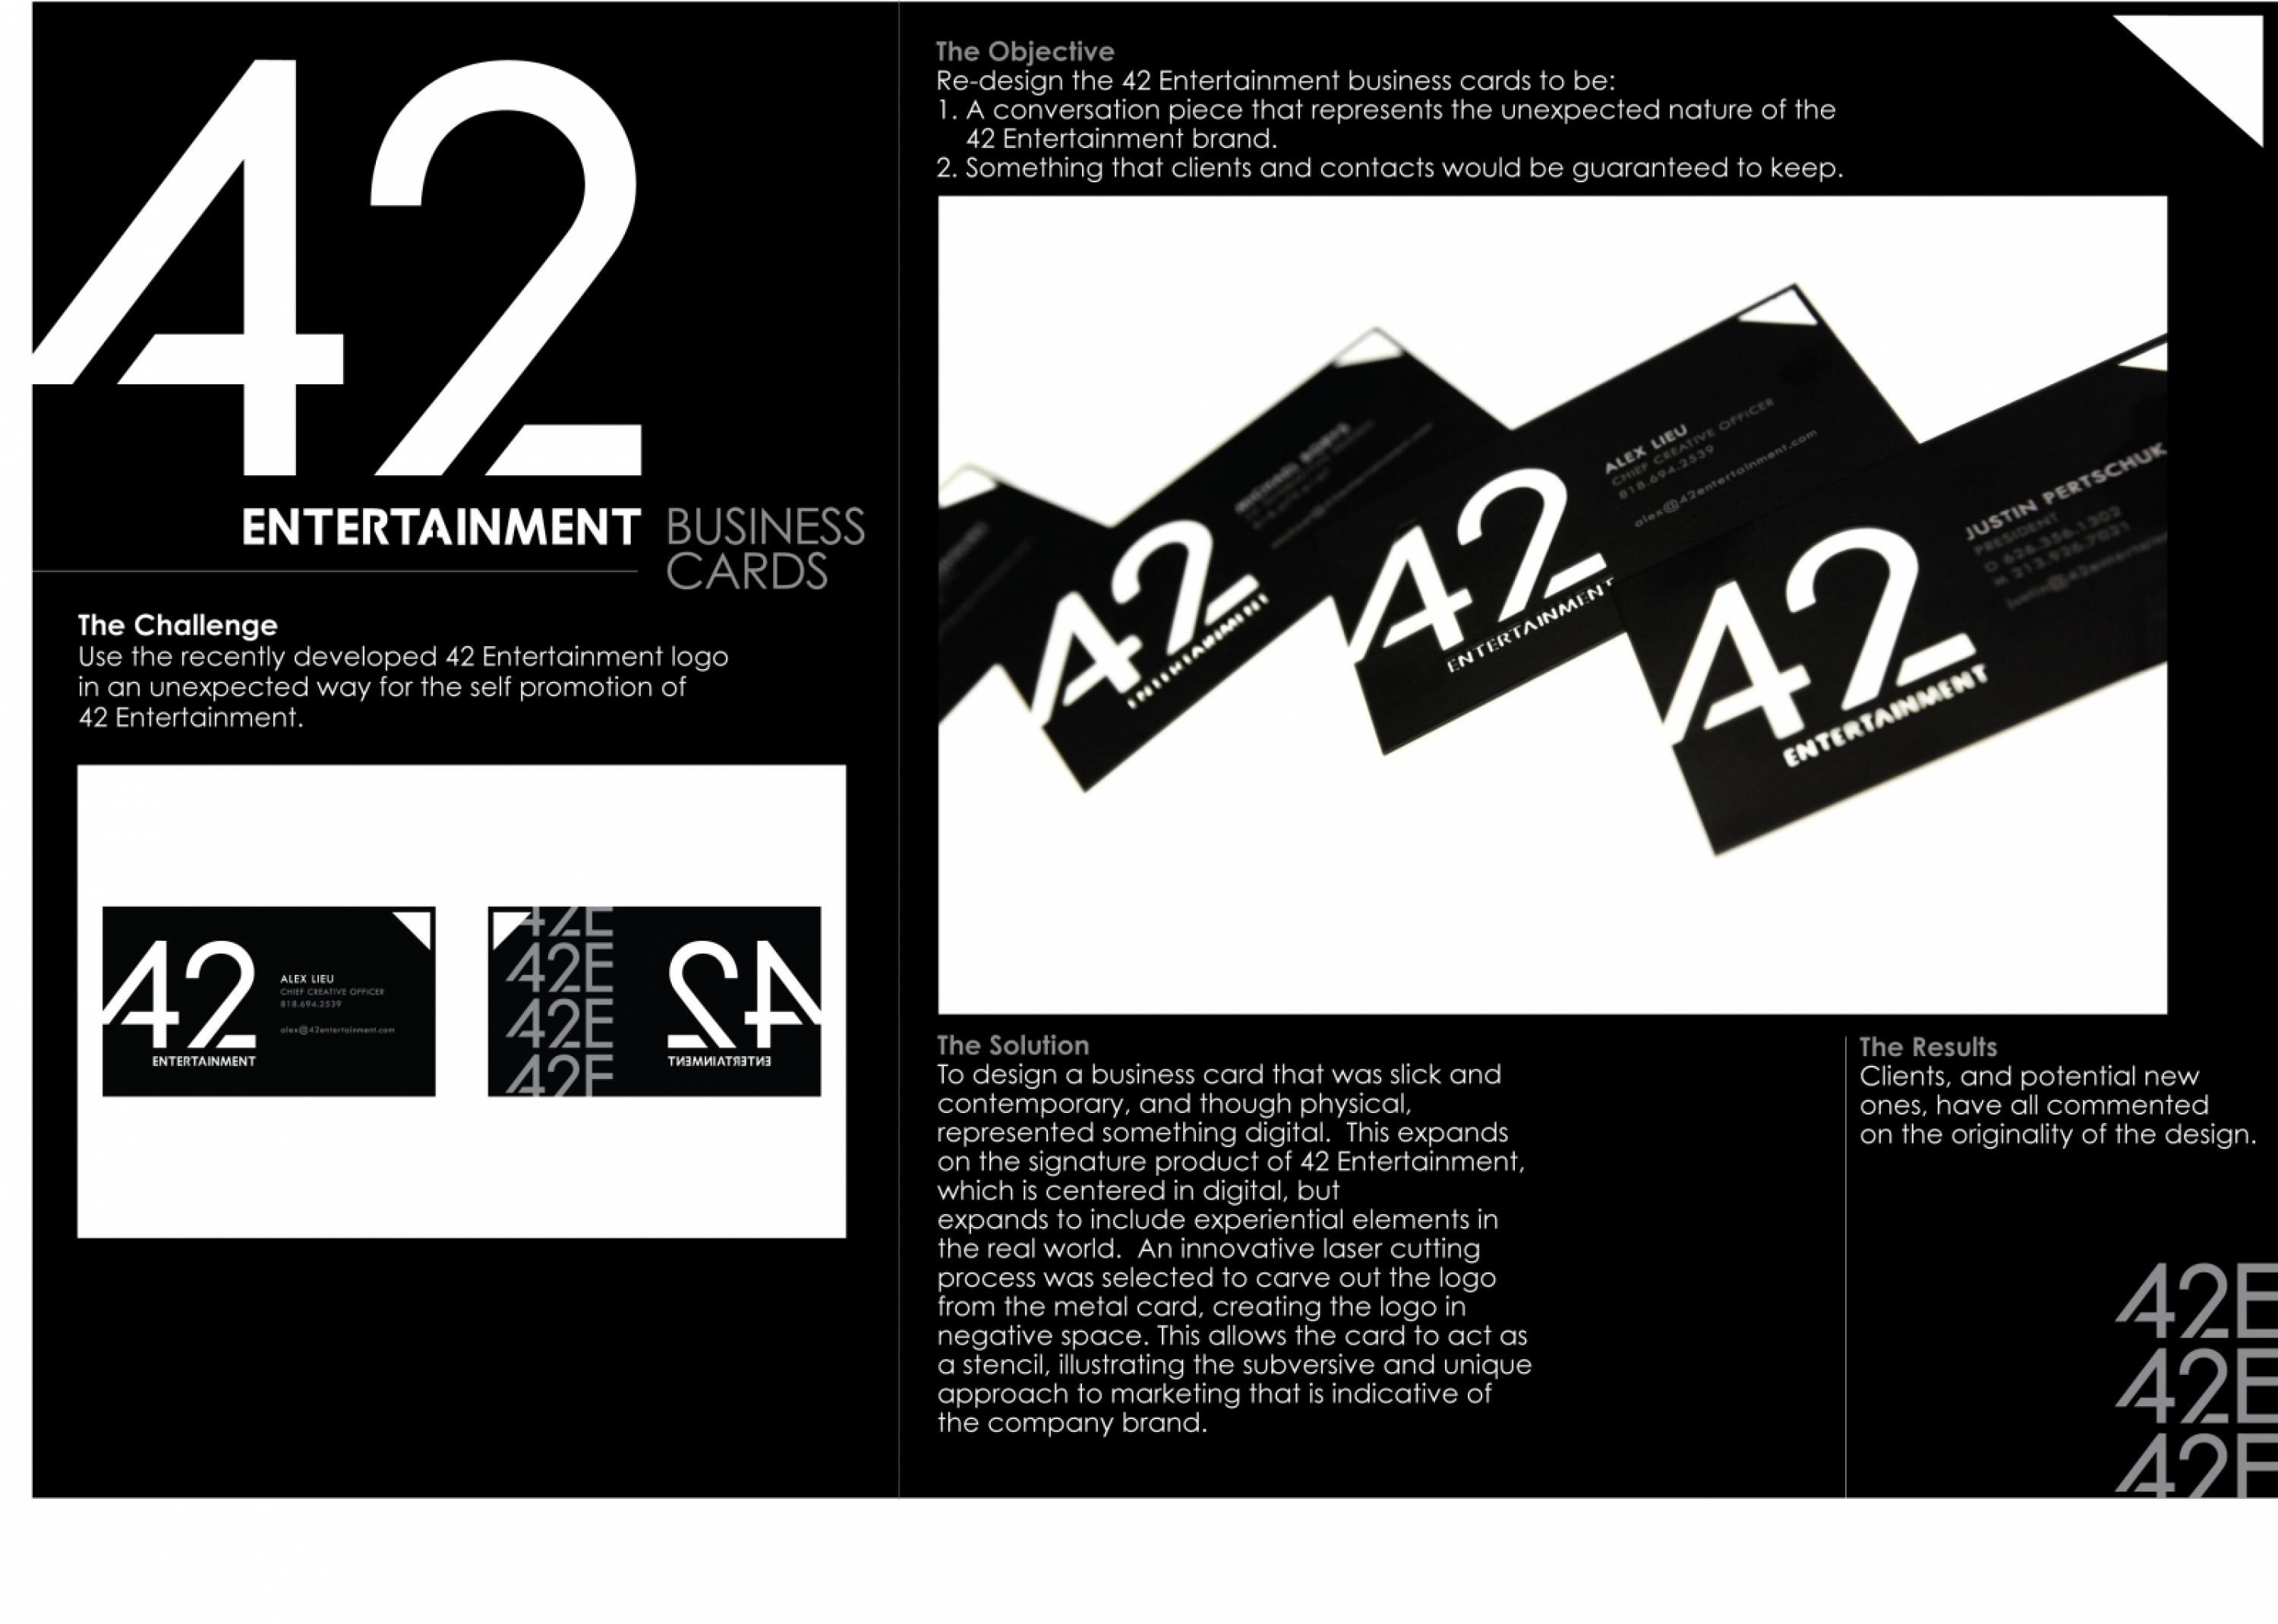 42 ENTERTAINMENT BUSINESS CARDS